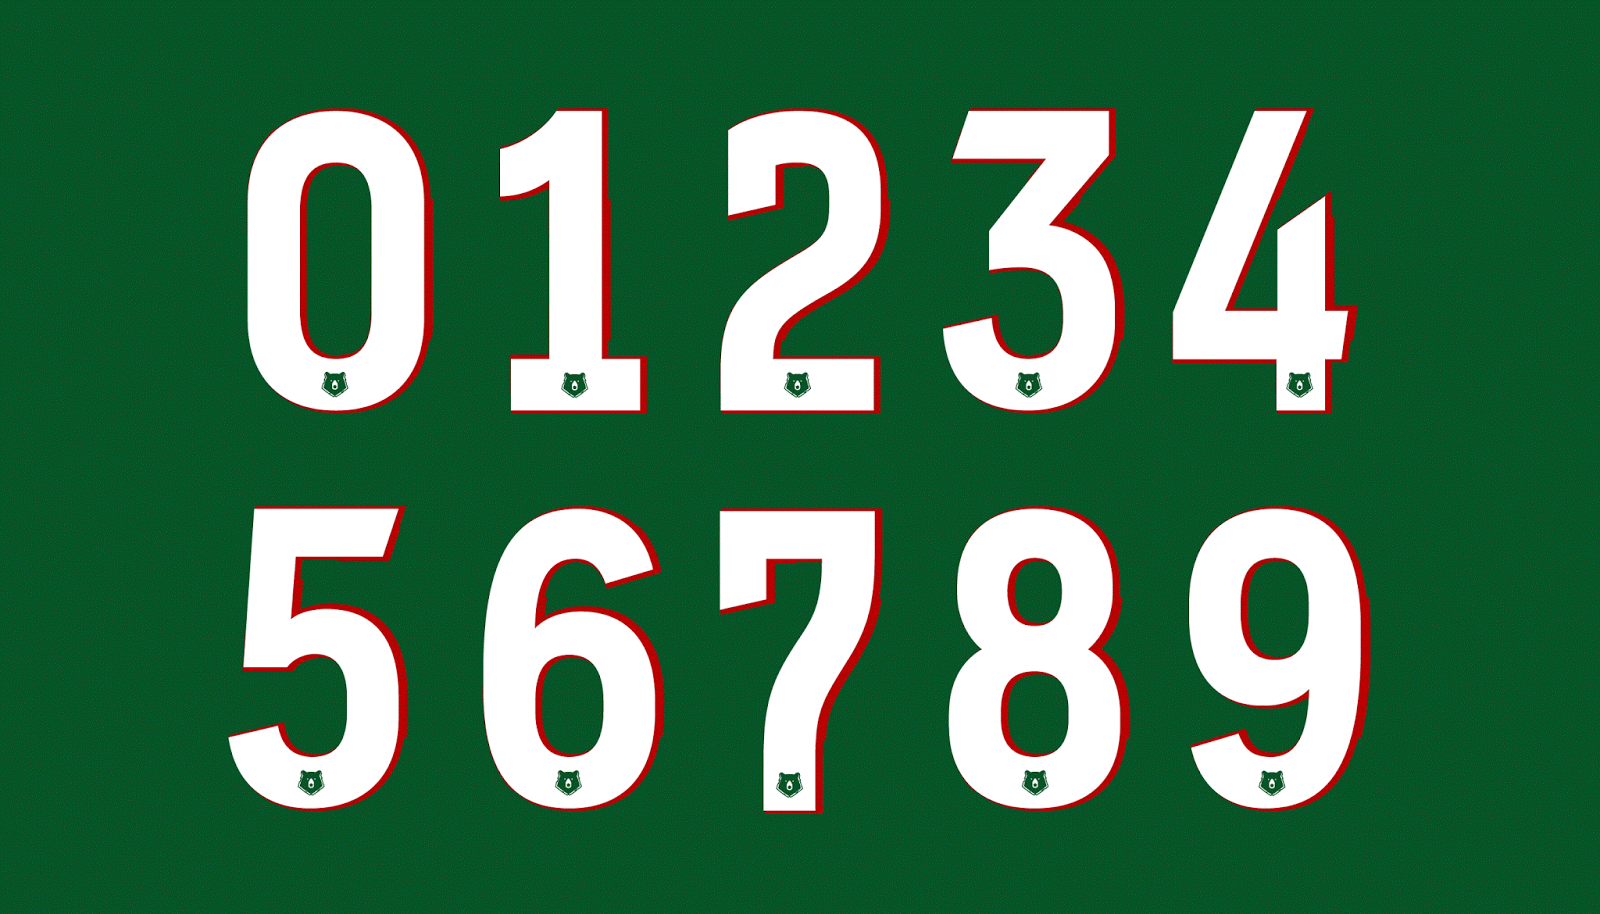 RPL-18-19-Font-Numbers.gif